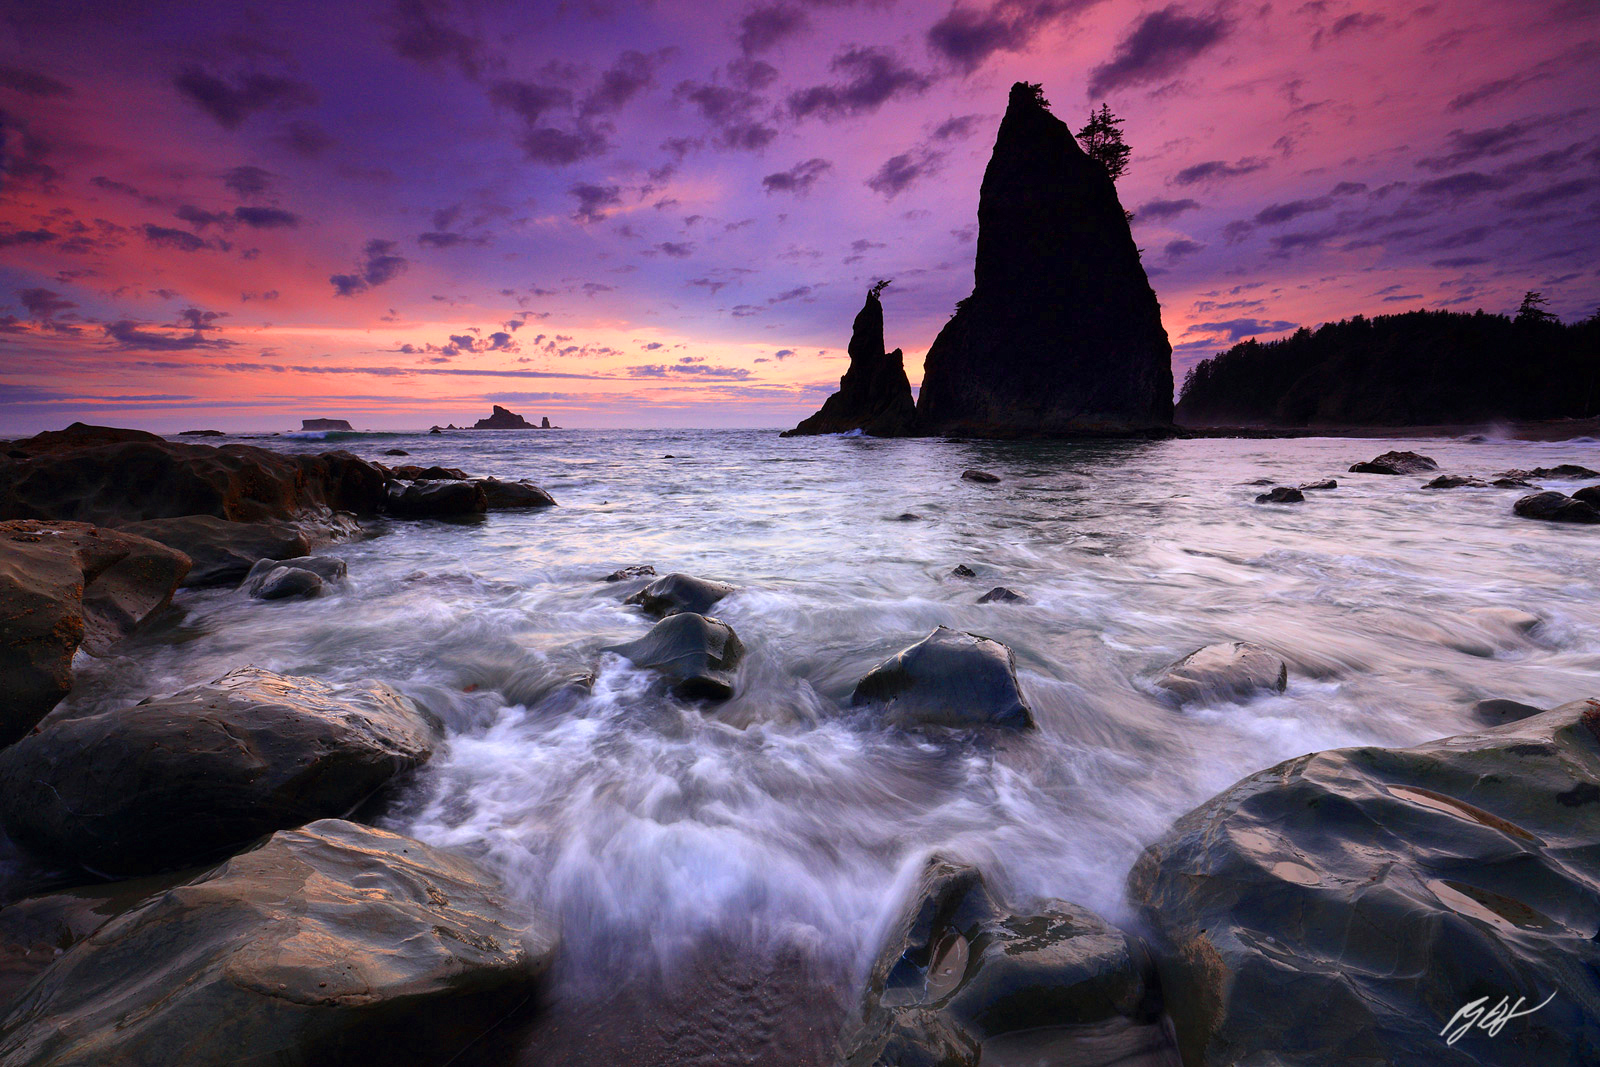 Sunset and Surf with Split Rock from Rialto Beach in Olympic National Park in Washington